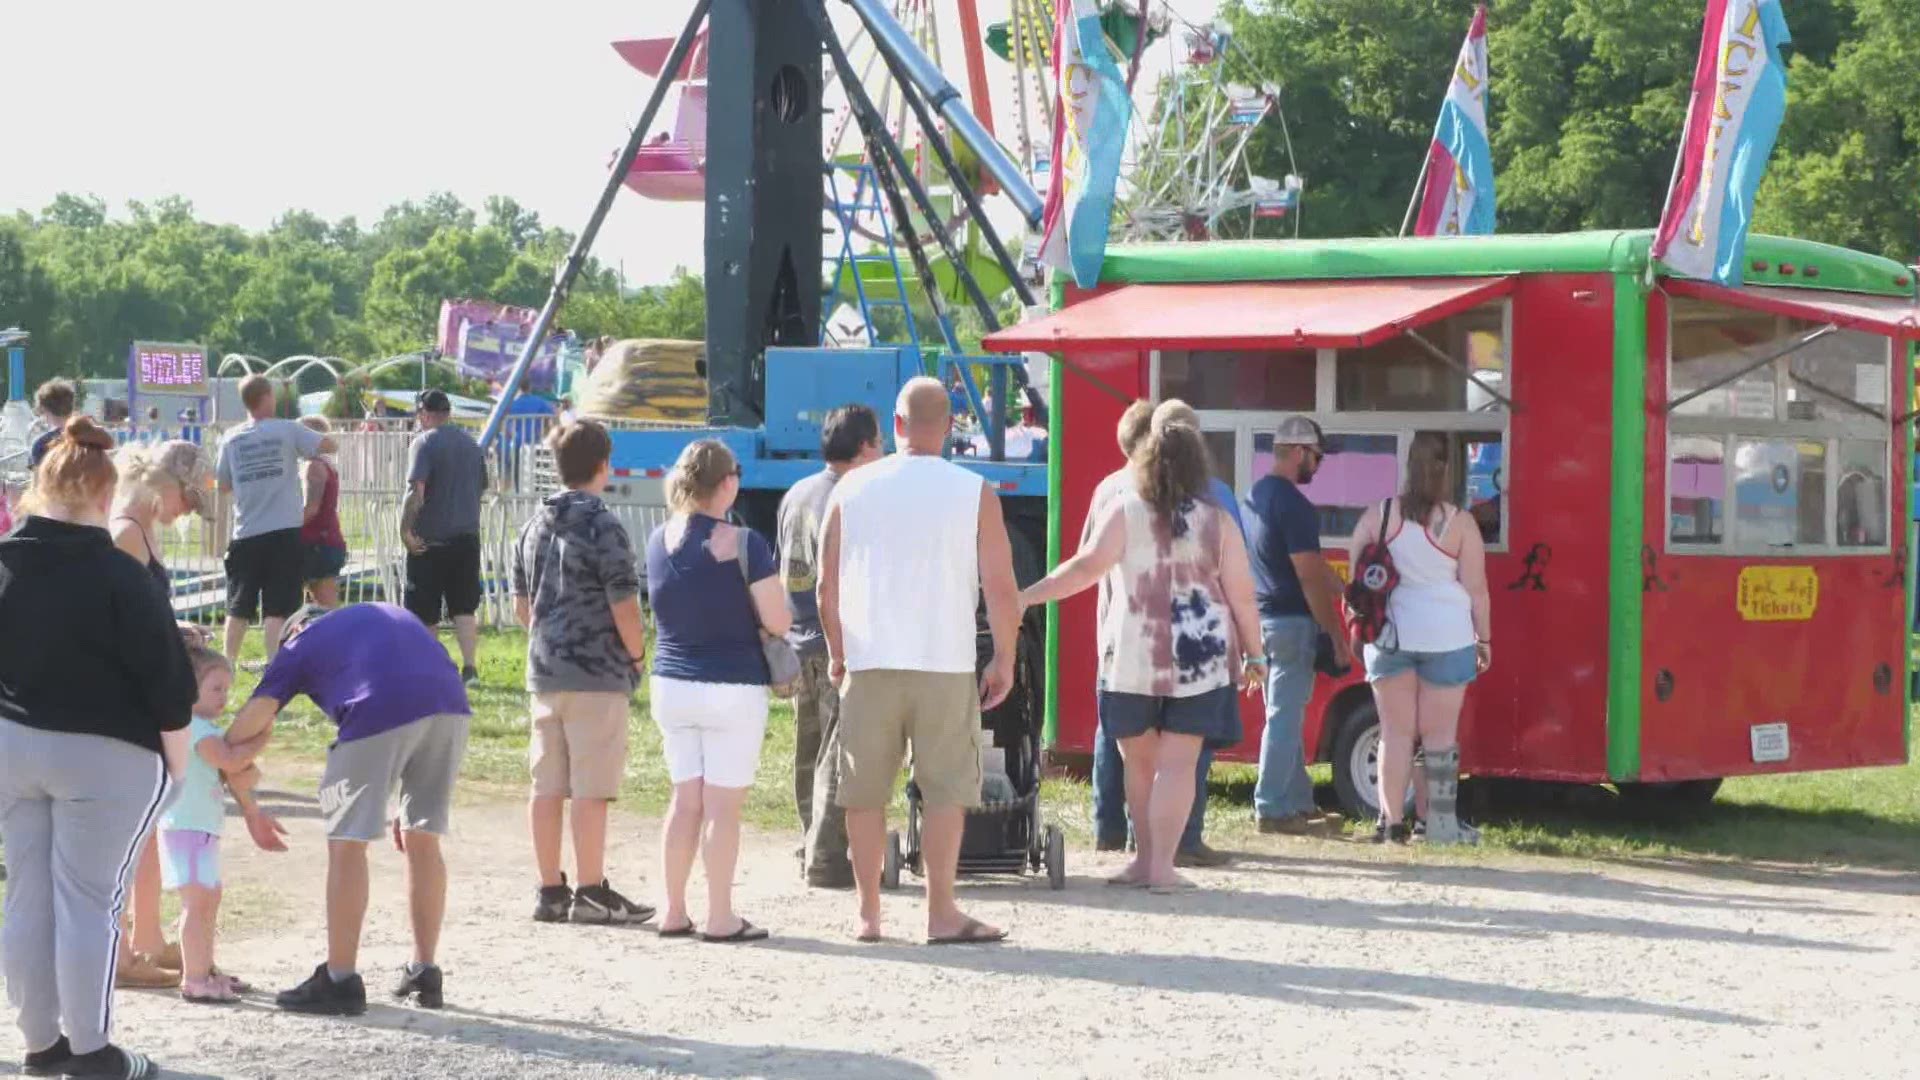 After a year of virtually no events, crowds are filling back up at county fairs just  getting started around the area.